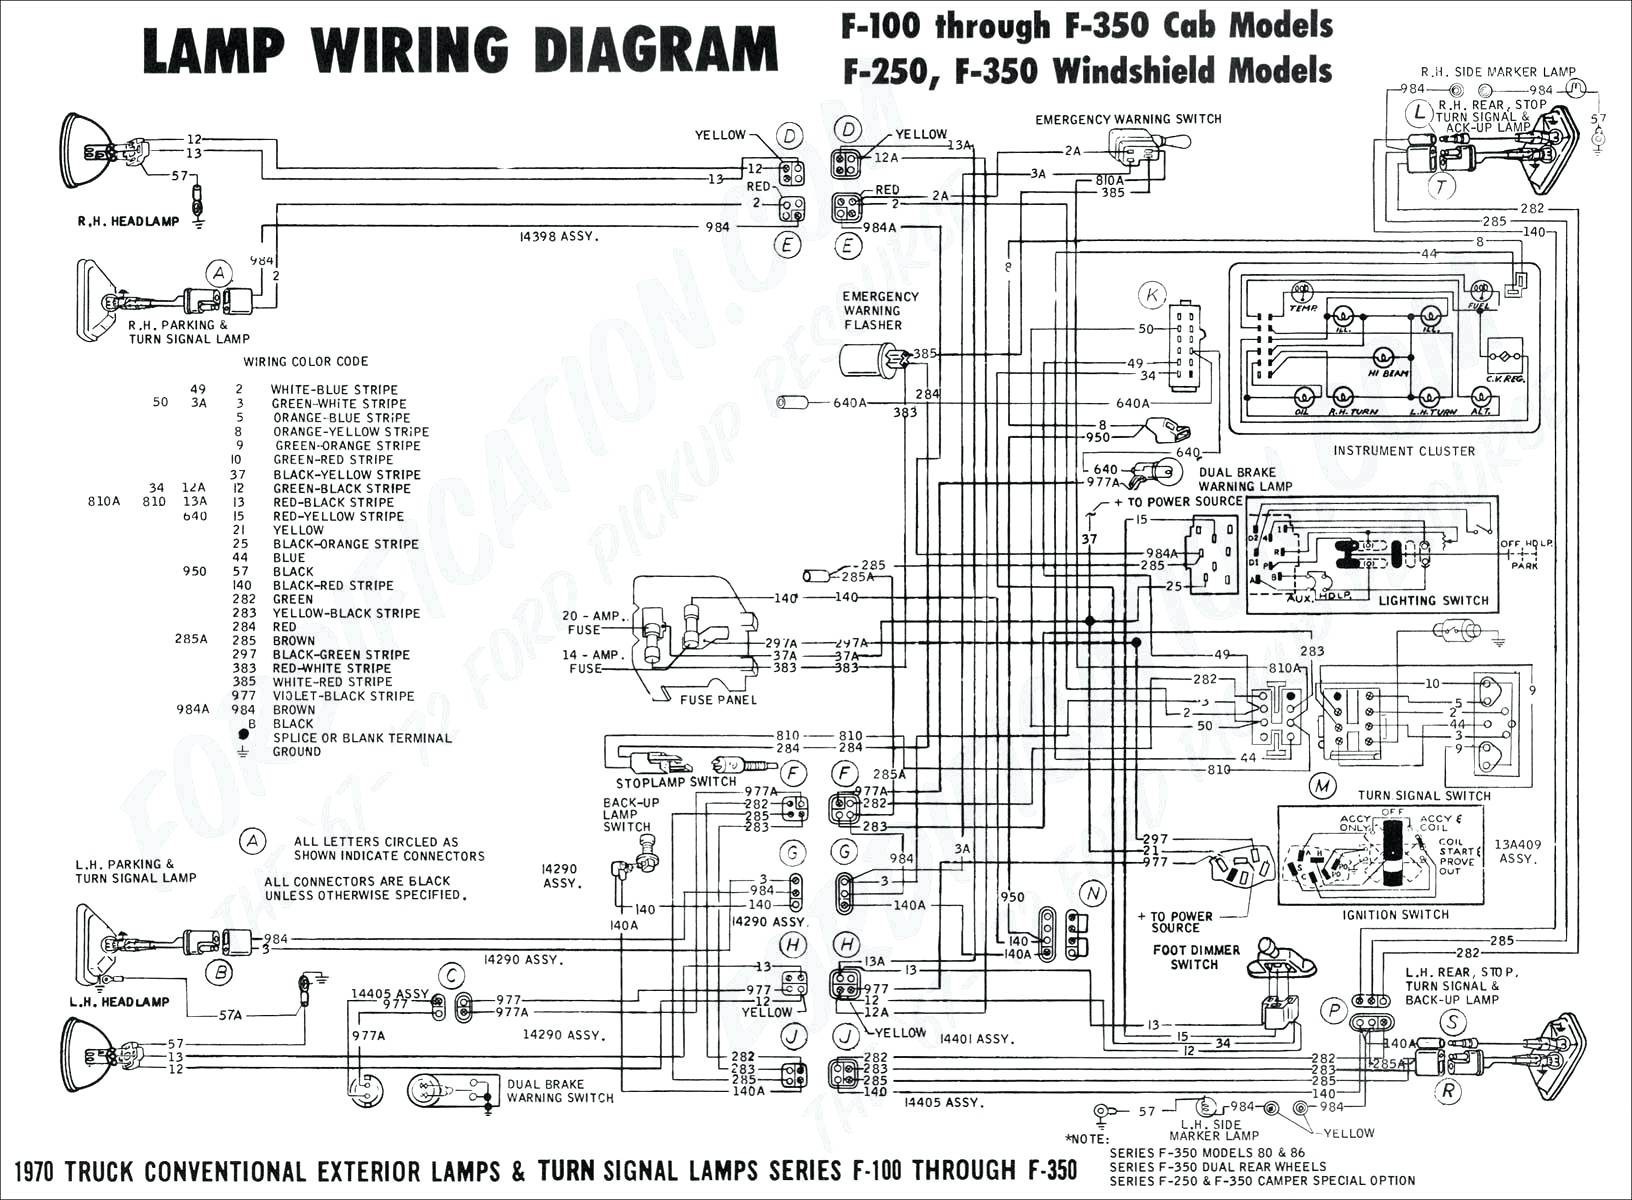 Wiring Diagram Western Unimount Reference Western Plow Wiring Diagram Best Wiring Diagram 17 Western Plow